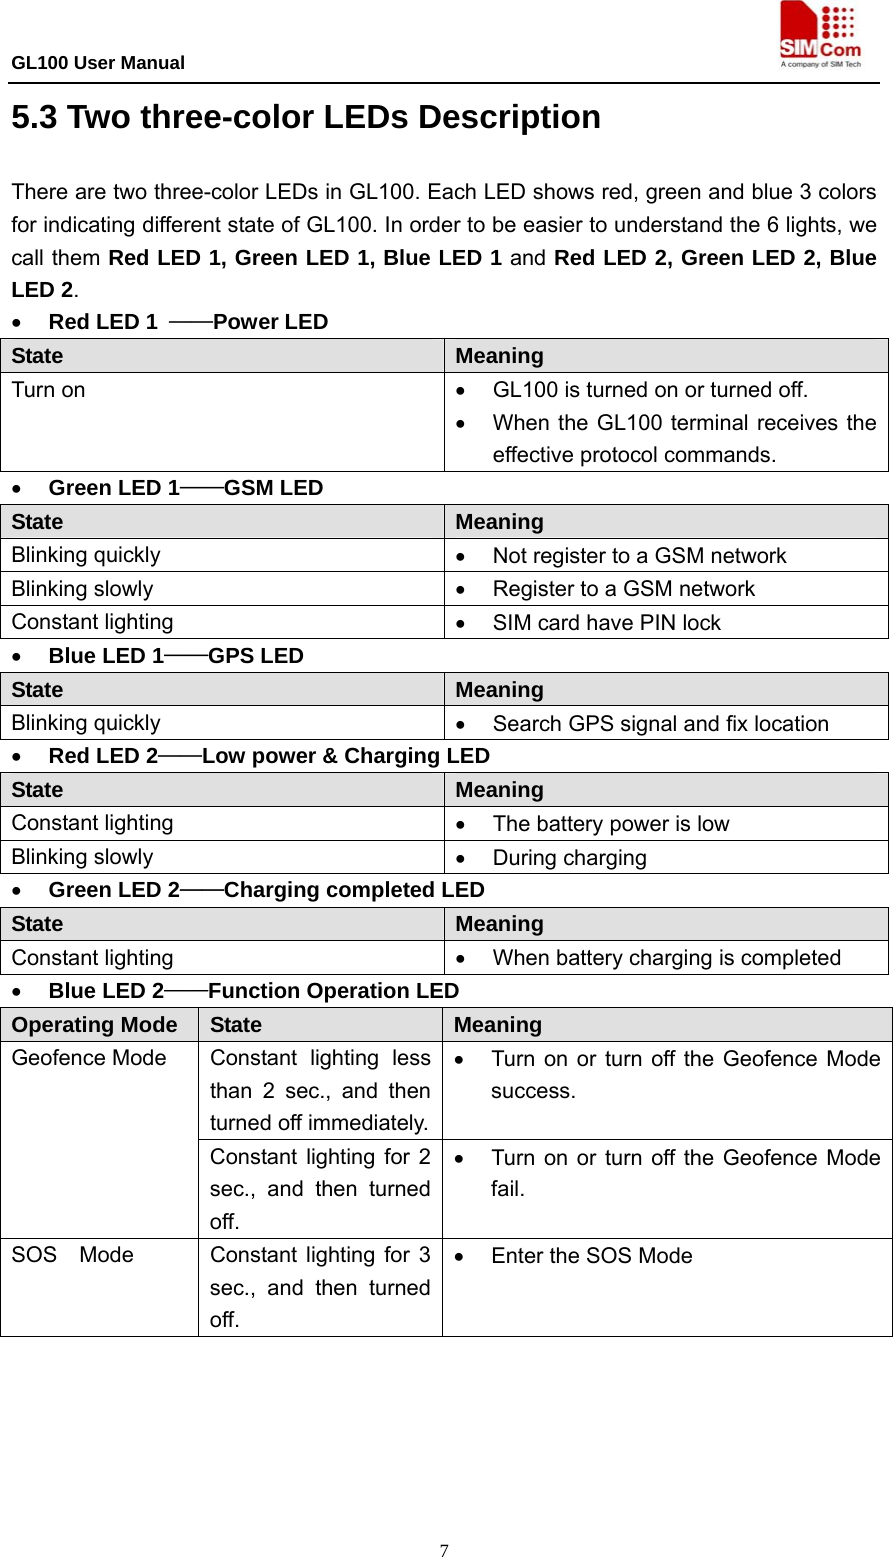 GL100 User Manual                                                                             7 5.3 Two three-color LEDs Description There are two three-color LEDs in GL100. Each LED shows red, green and blue 3 colors for indicating different state of GL100. In order to be easier to understand the 6 lights, we call them Red LED 1, Green LED 1, Blue LED 1 and Red LED 2, Green LED 2, Blue LED 2. • Red LED 1  ——Power LED State  Meaning Turn on  •  GL100 is turned on or turned off. •  When the GL100 terminal receives the effective protocol commands. • Green LED 1——GSM LED State  Meaning Blinking quickly  •  Not register to a GSM network Blinking slowly  •  Register to a GSM network Constant lighting  •  SIM card have PIN lock • Blue LED 1——GPS LED State  Meaning Blinking quickly  •  Search GPS signal and fix location • Red LED 2——Low power &amp; Charging LED State  Meaning Constant lighting  •  The battery power is low Blinking slowly  • During charging  • Green LED 2——Charging completed LED State  Meaning Constant lighting  •  When battery charging is completed • Blue LED 2——Function Operation LED Operating Mode  State  Meaning Constant lighting less than 2 sec., and then turned off immediately.•  Turn on or turn off the Geofence Mode success. Geofence Mode Constant lighting for 2 sec., and then turned off. •  Turn on or turn off the Geofence Mode fail. SOS Mode  Constant lighting for 3 sec., and then turned off. •  Enter the SOS Mode  